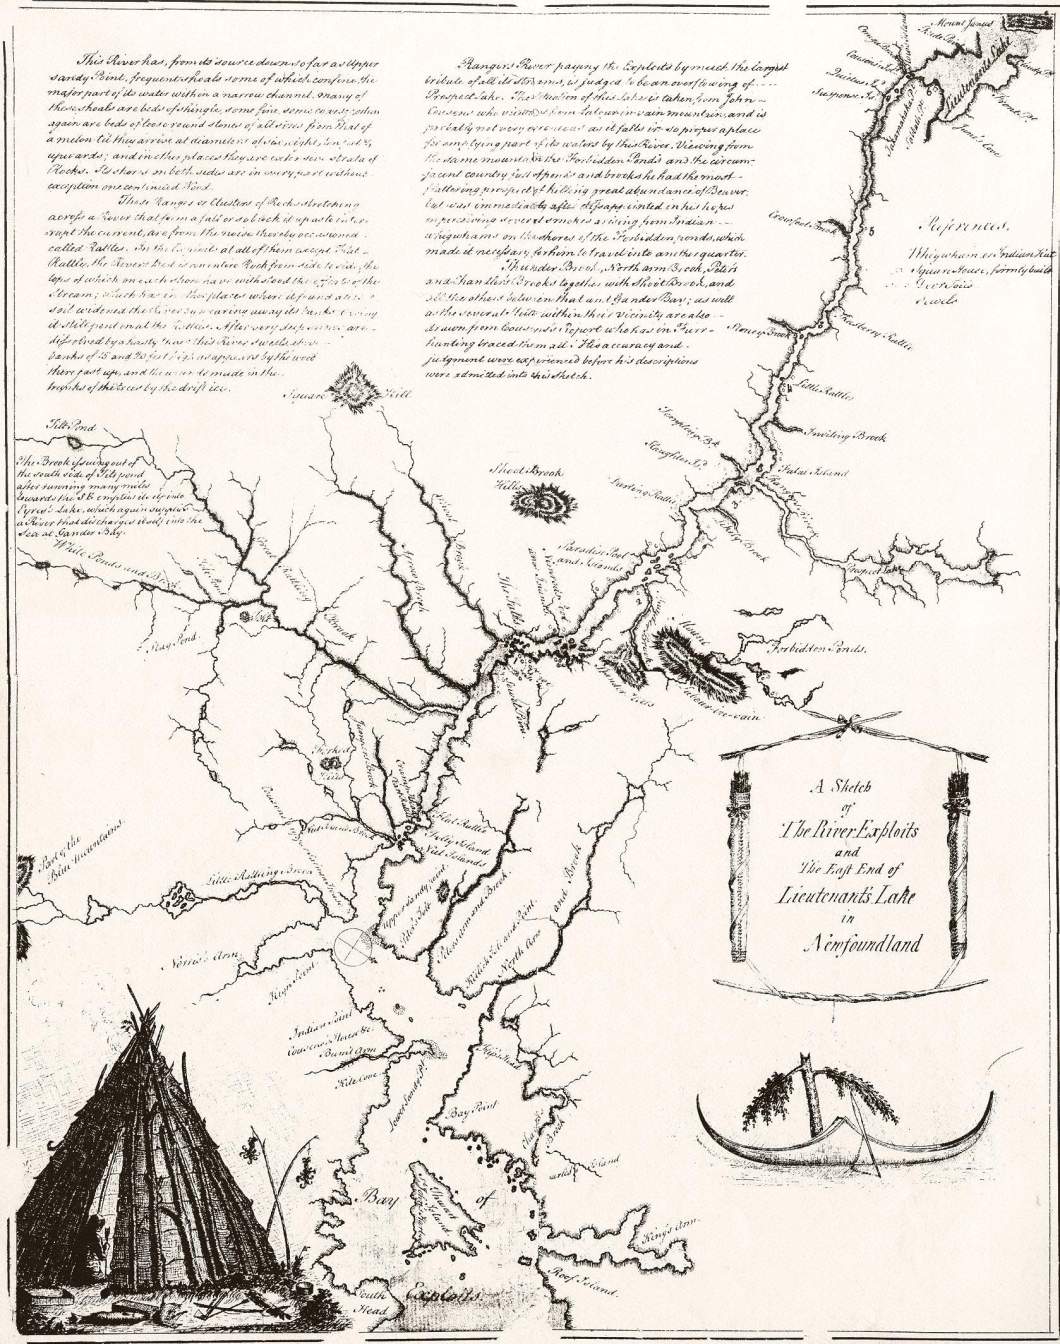 Cartwright's Map of the Exploits River Circa 1770. Many of the place names noted here did not survive into the 20th Century, some like Great Rattling Brook did. (Source: http://www.heritage.nf.ca/exploration/river_large.html)